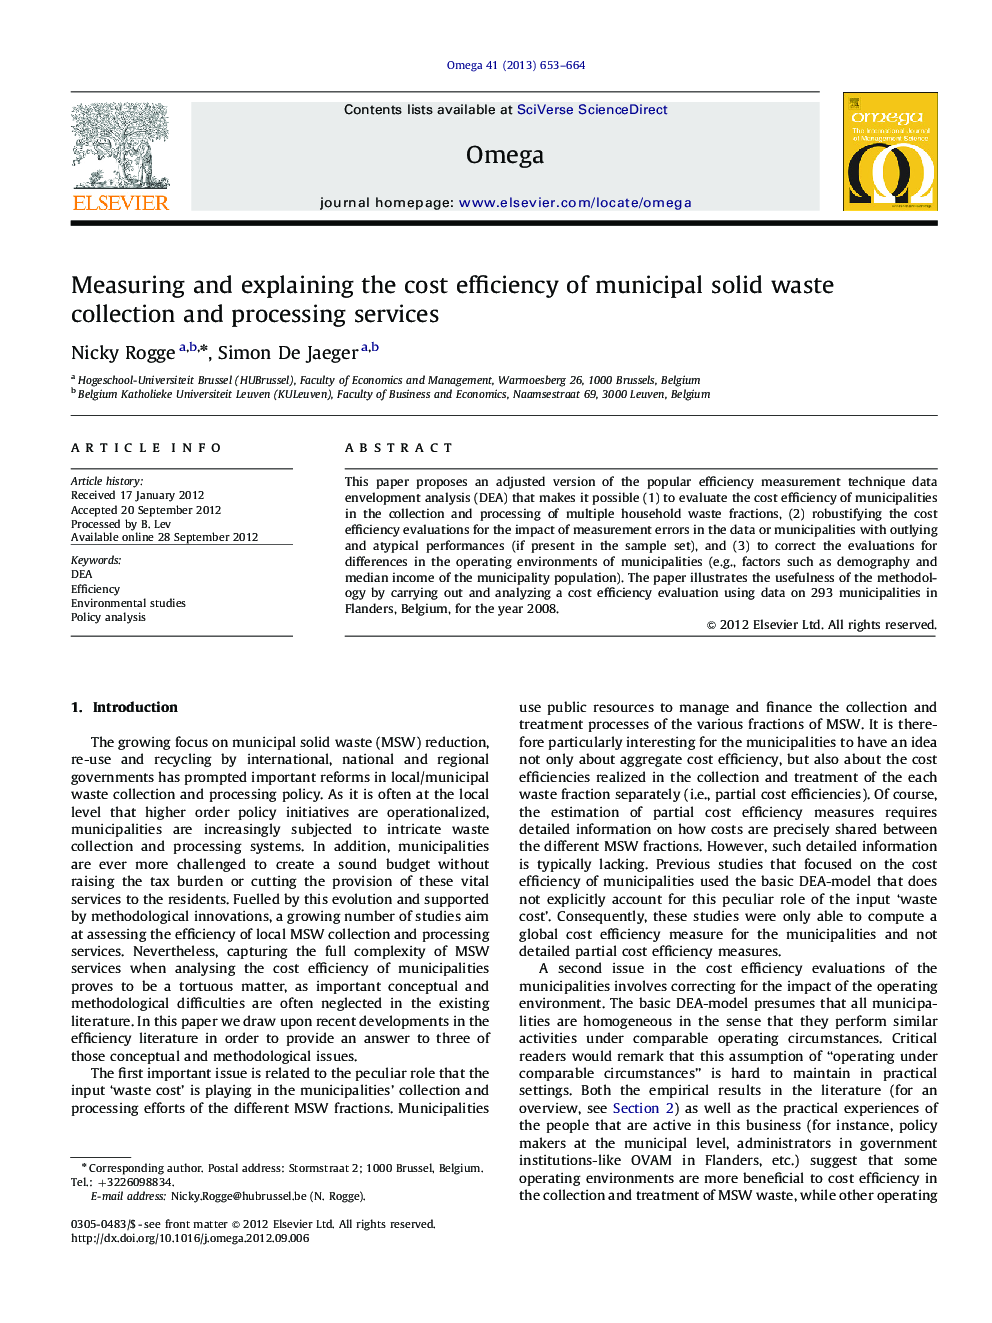 Measuring and explaining the cost efficiency of municipal solid waste collection and processing services